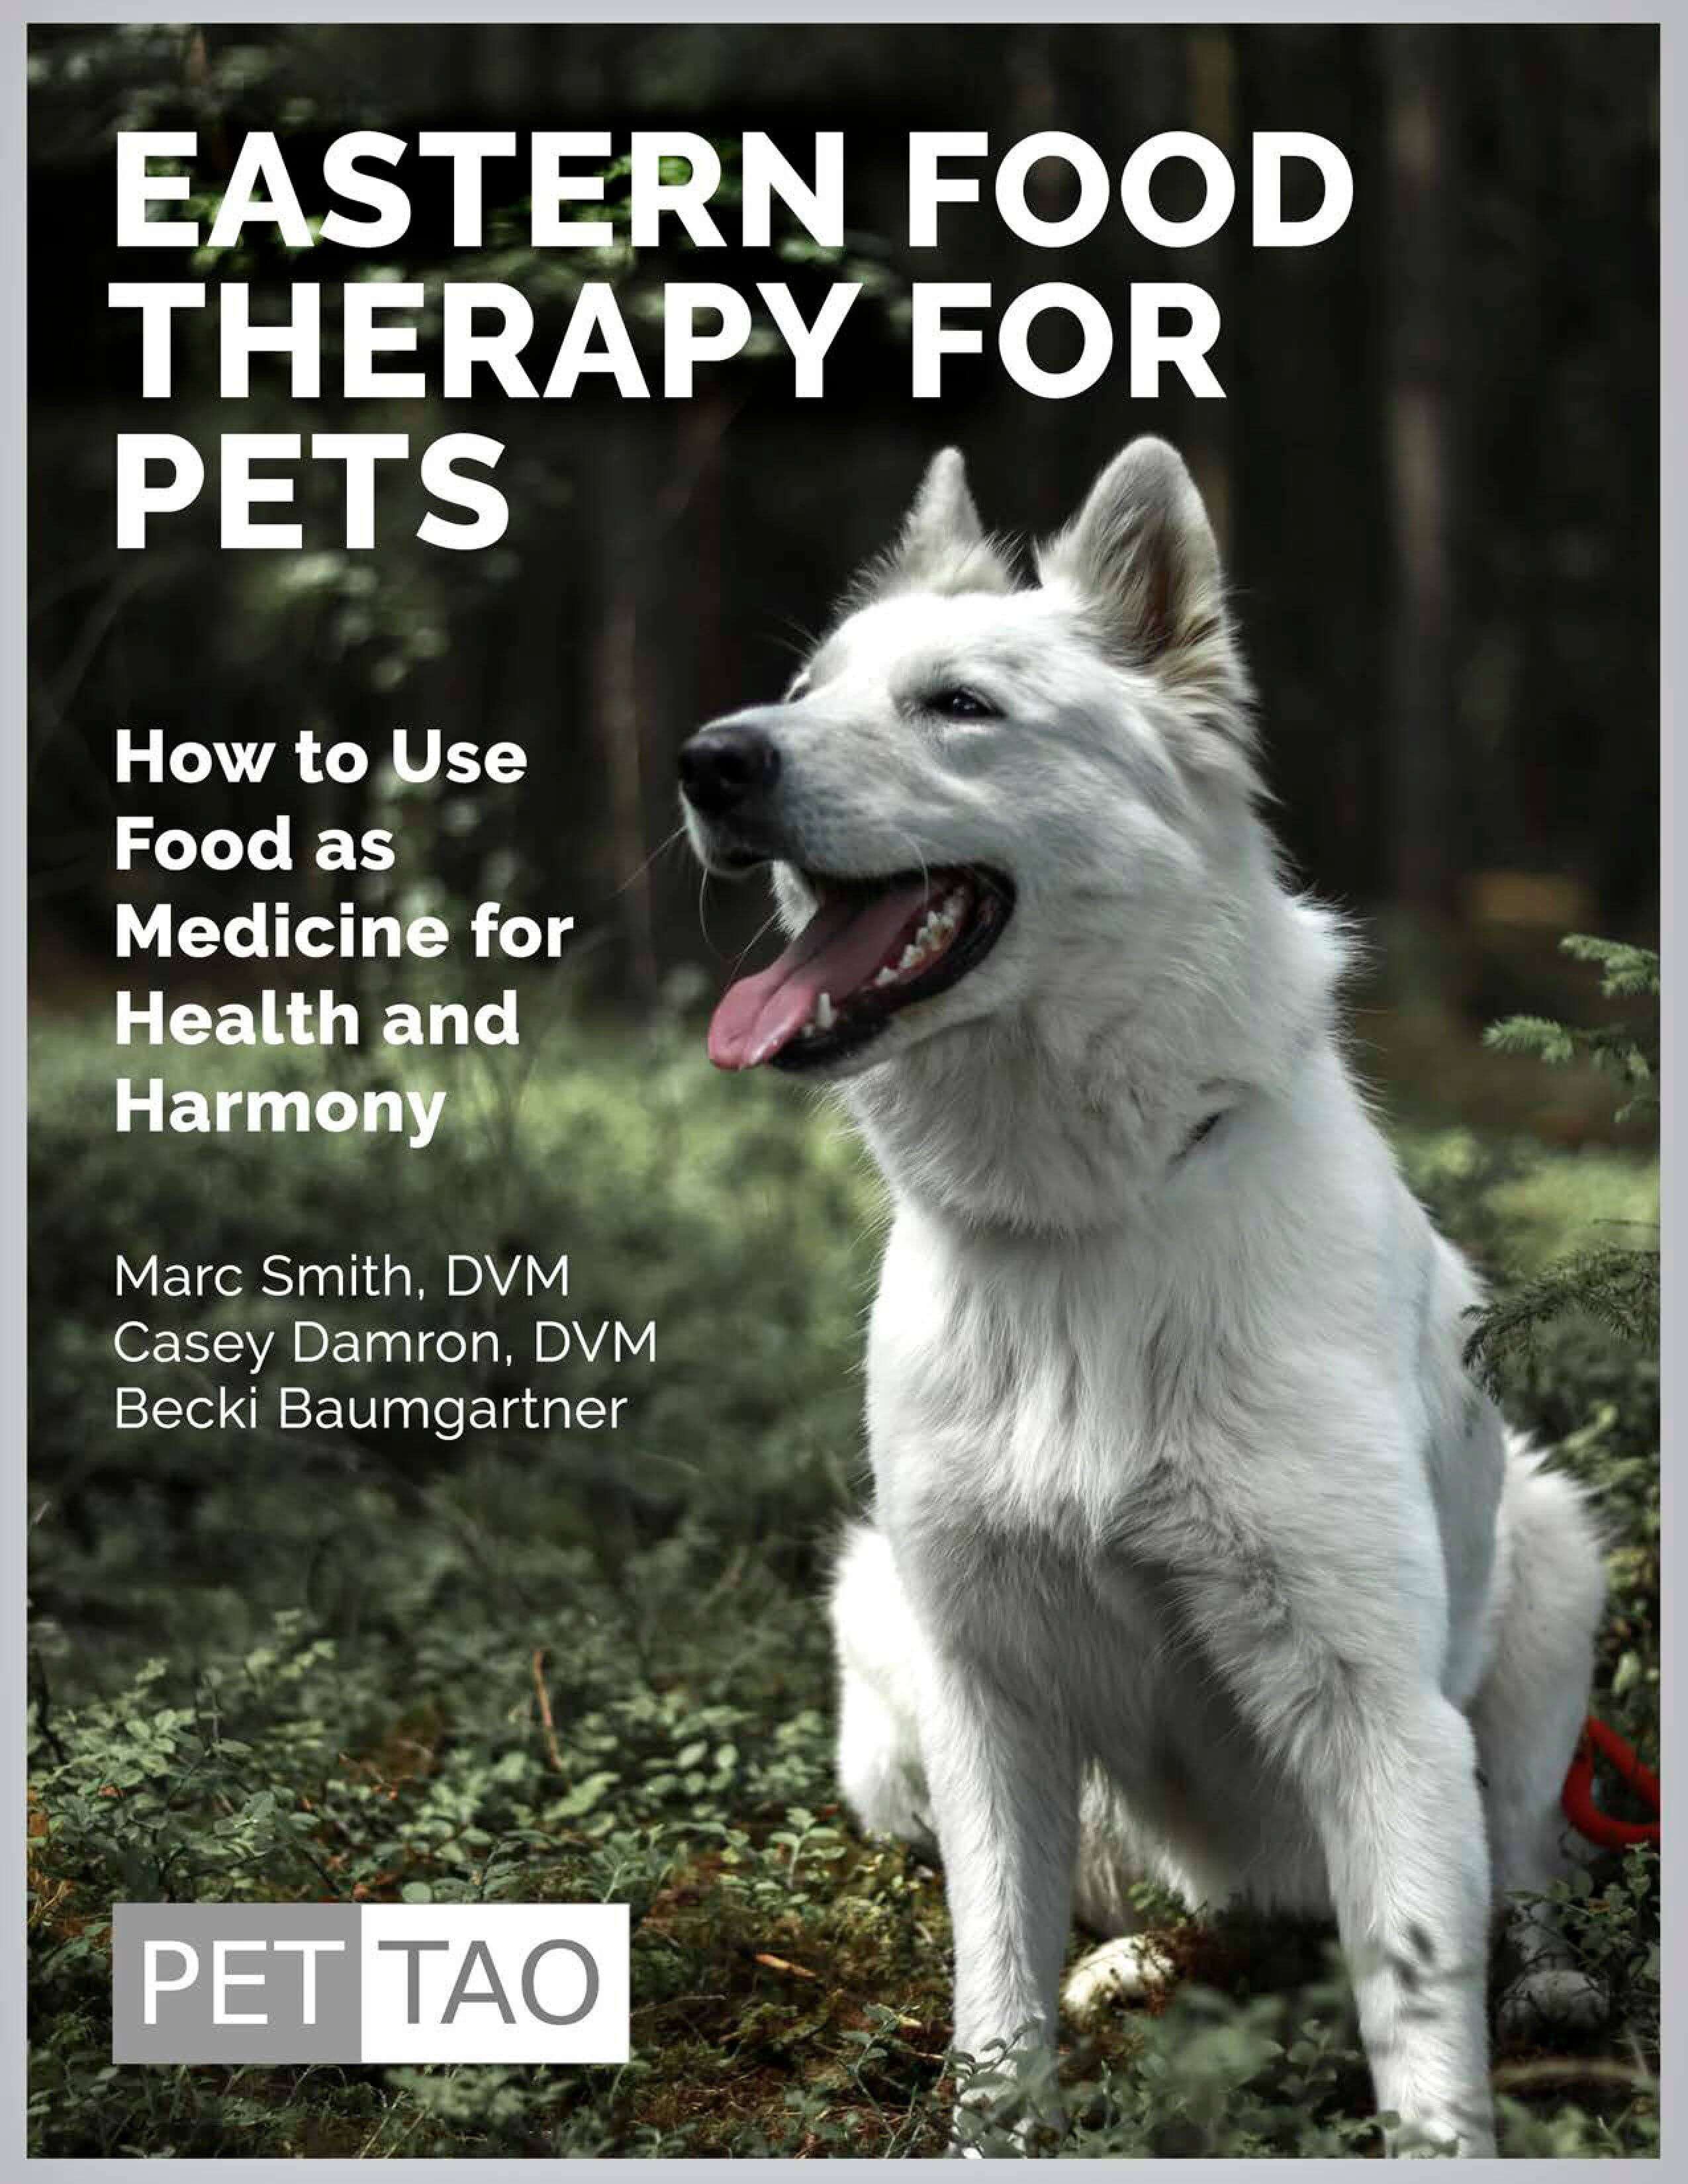 Eastern Food Therapy for Pets: How to Use Food as Medicine for Health and Harmony